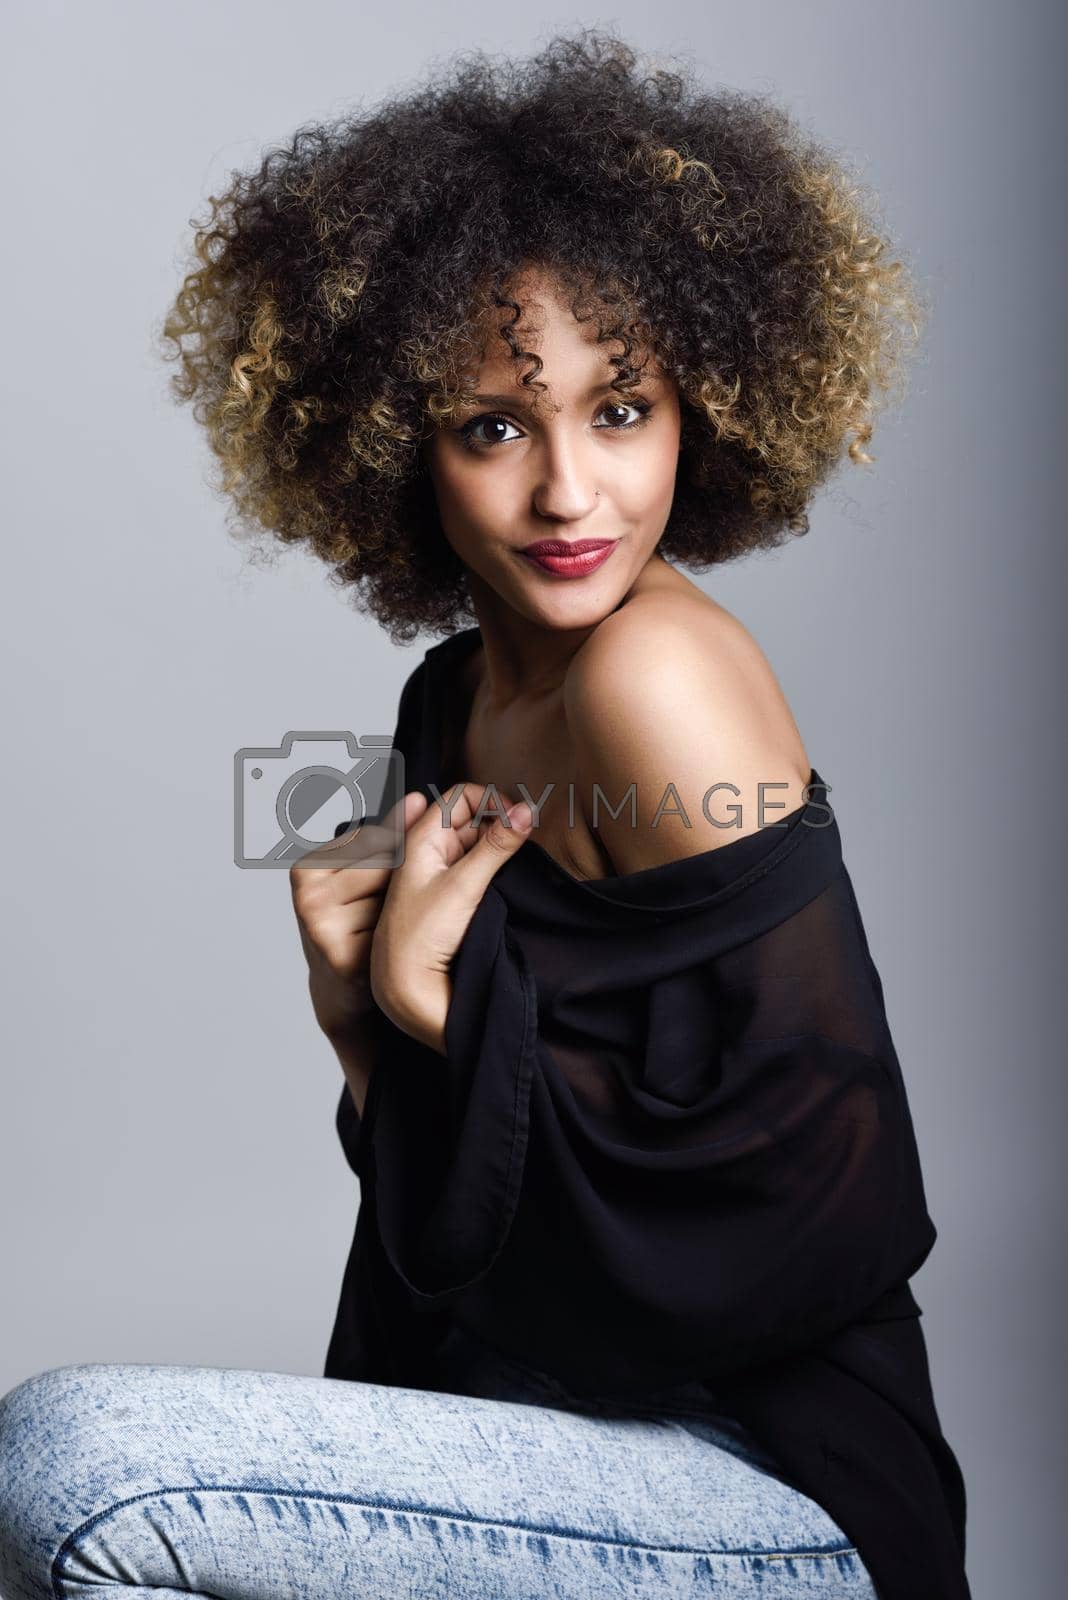 Royalty free image of Young black woman with afro hairstyle by javiindy